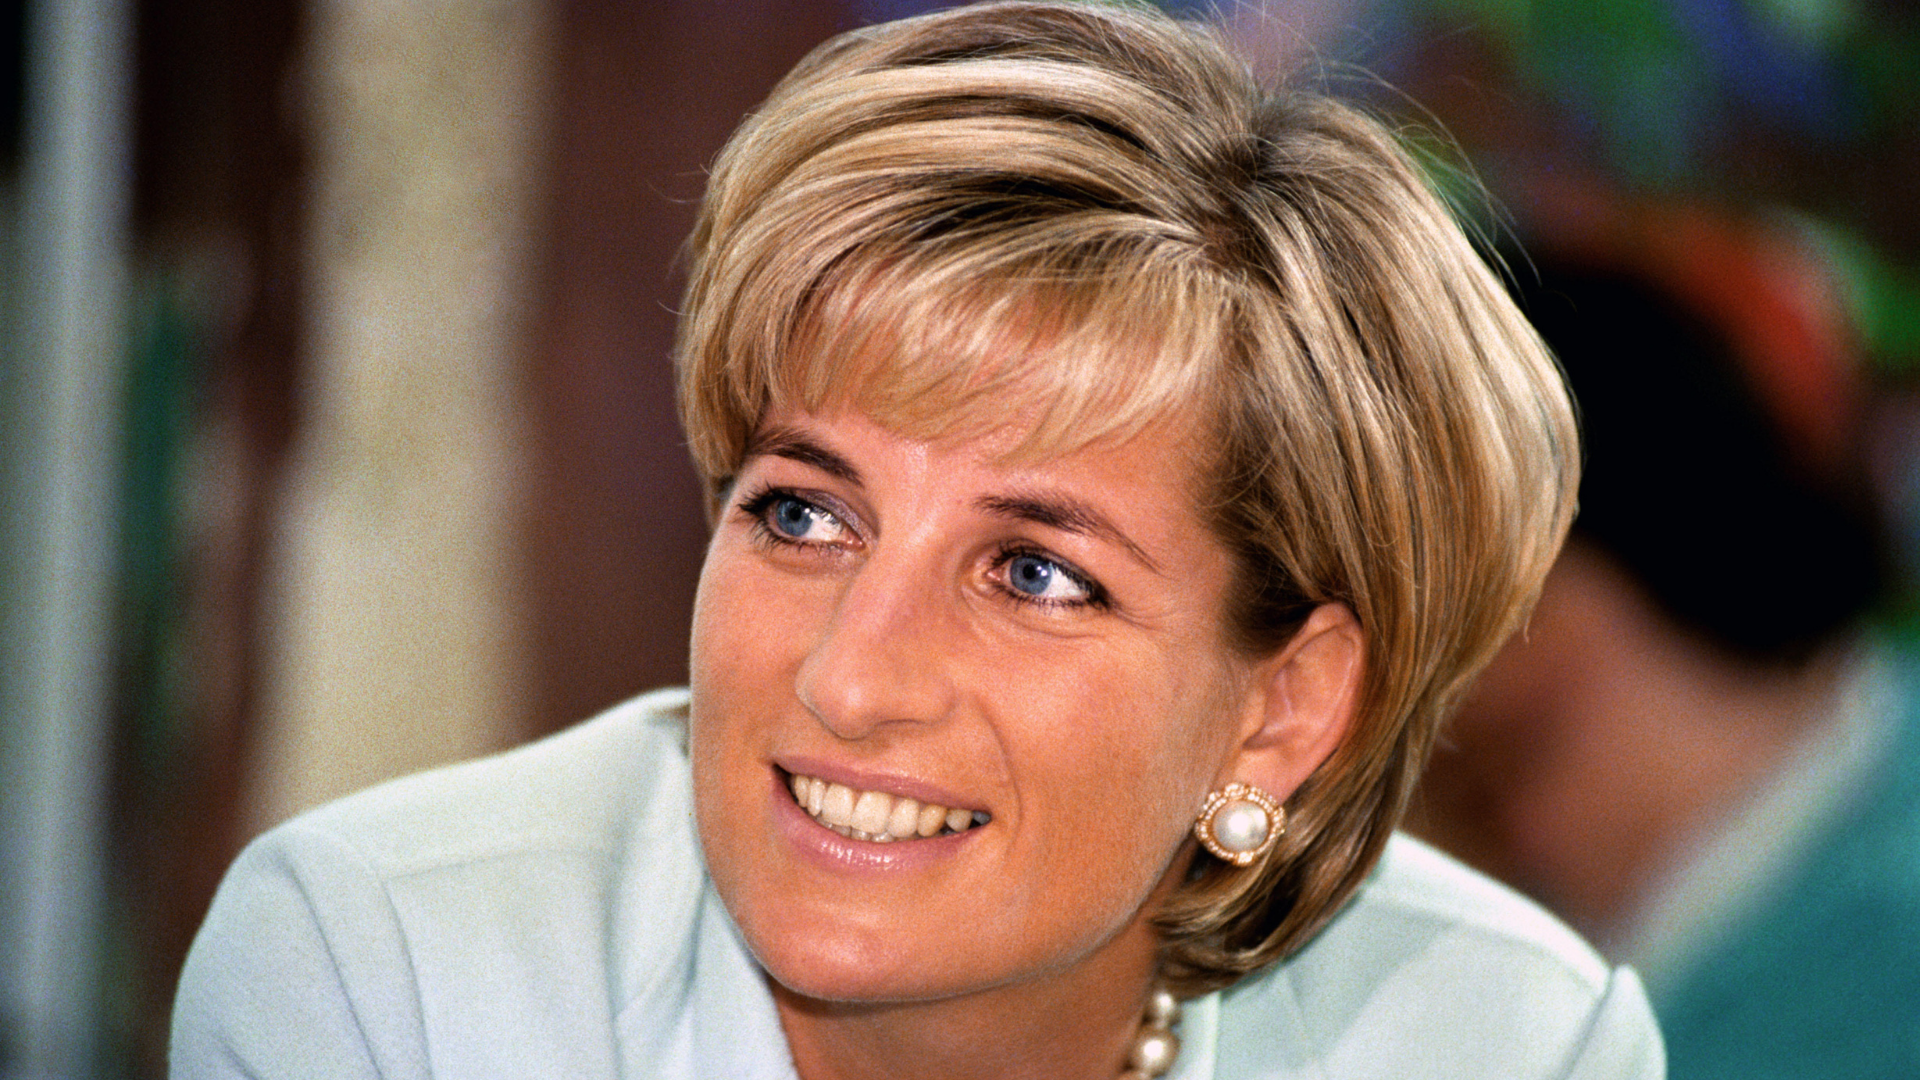 Princess Diana, One of the Most Impactful Icons of Our Time